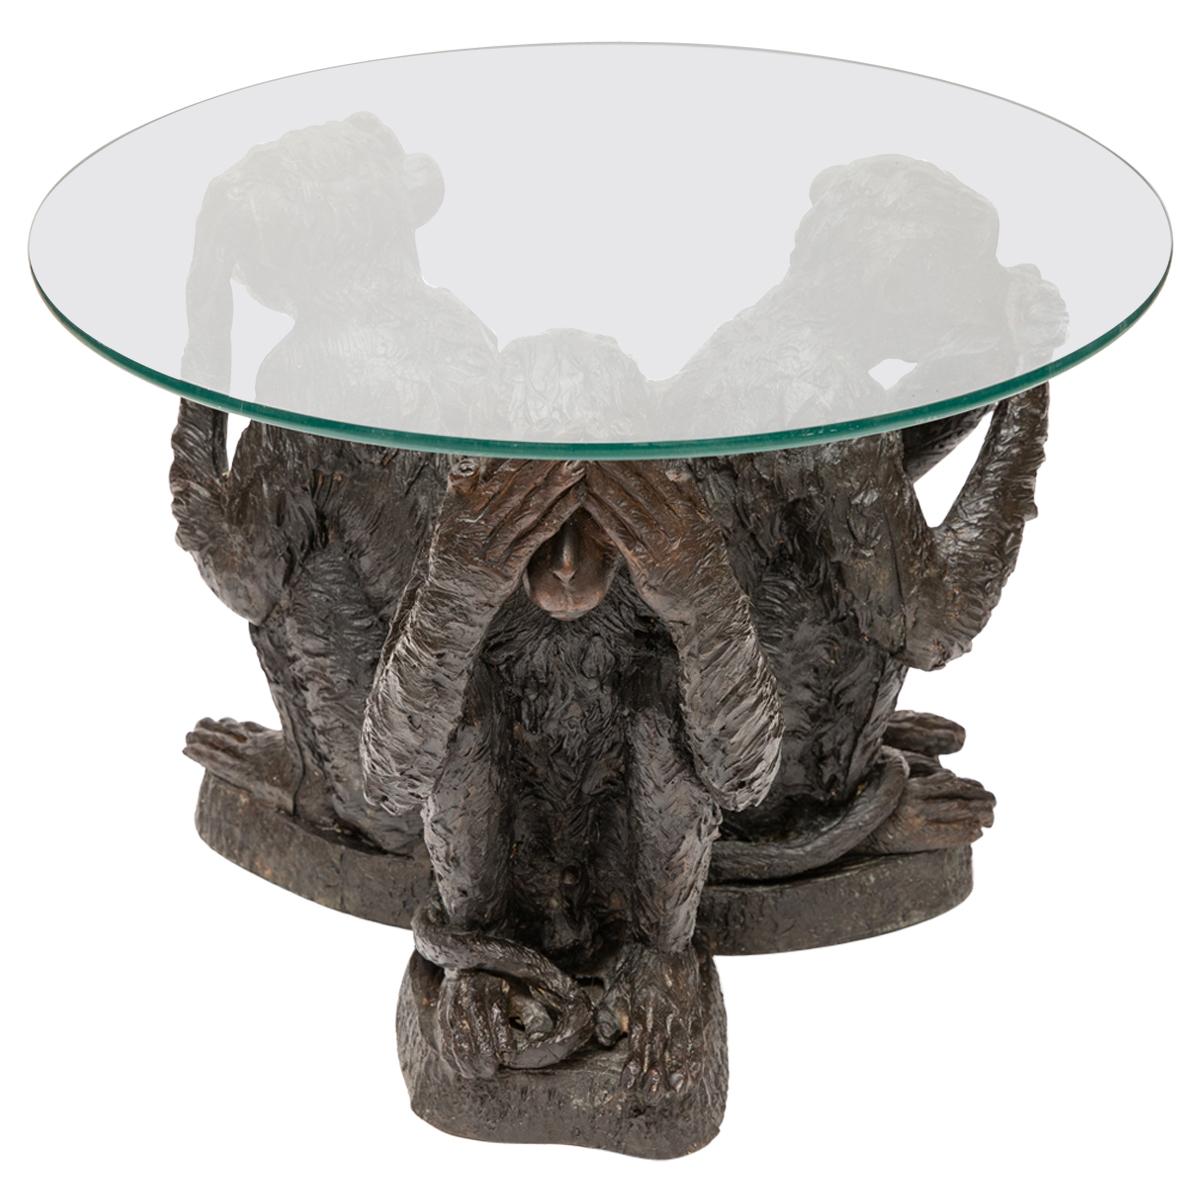 Three Wise Monkeys Bronze and Glass Table